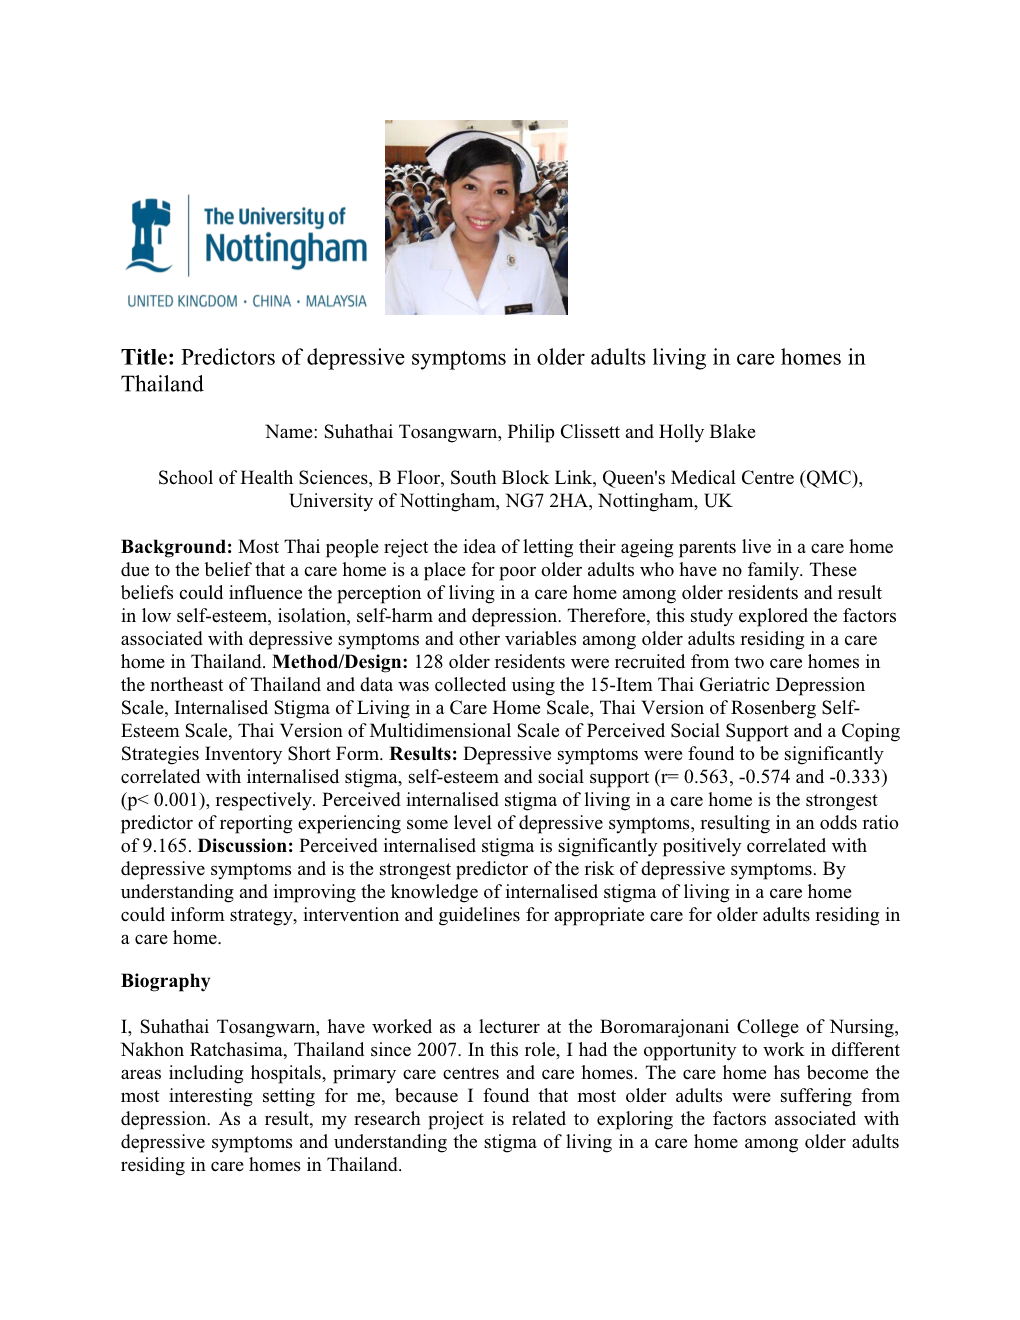 Title: Predictors of Depressive Symptoms in Older Adults Living in Care Homes in Thailand